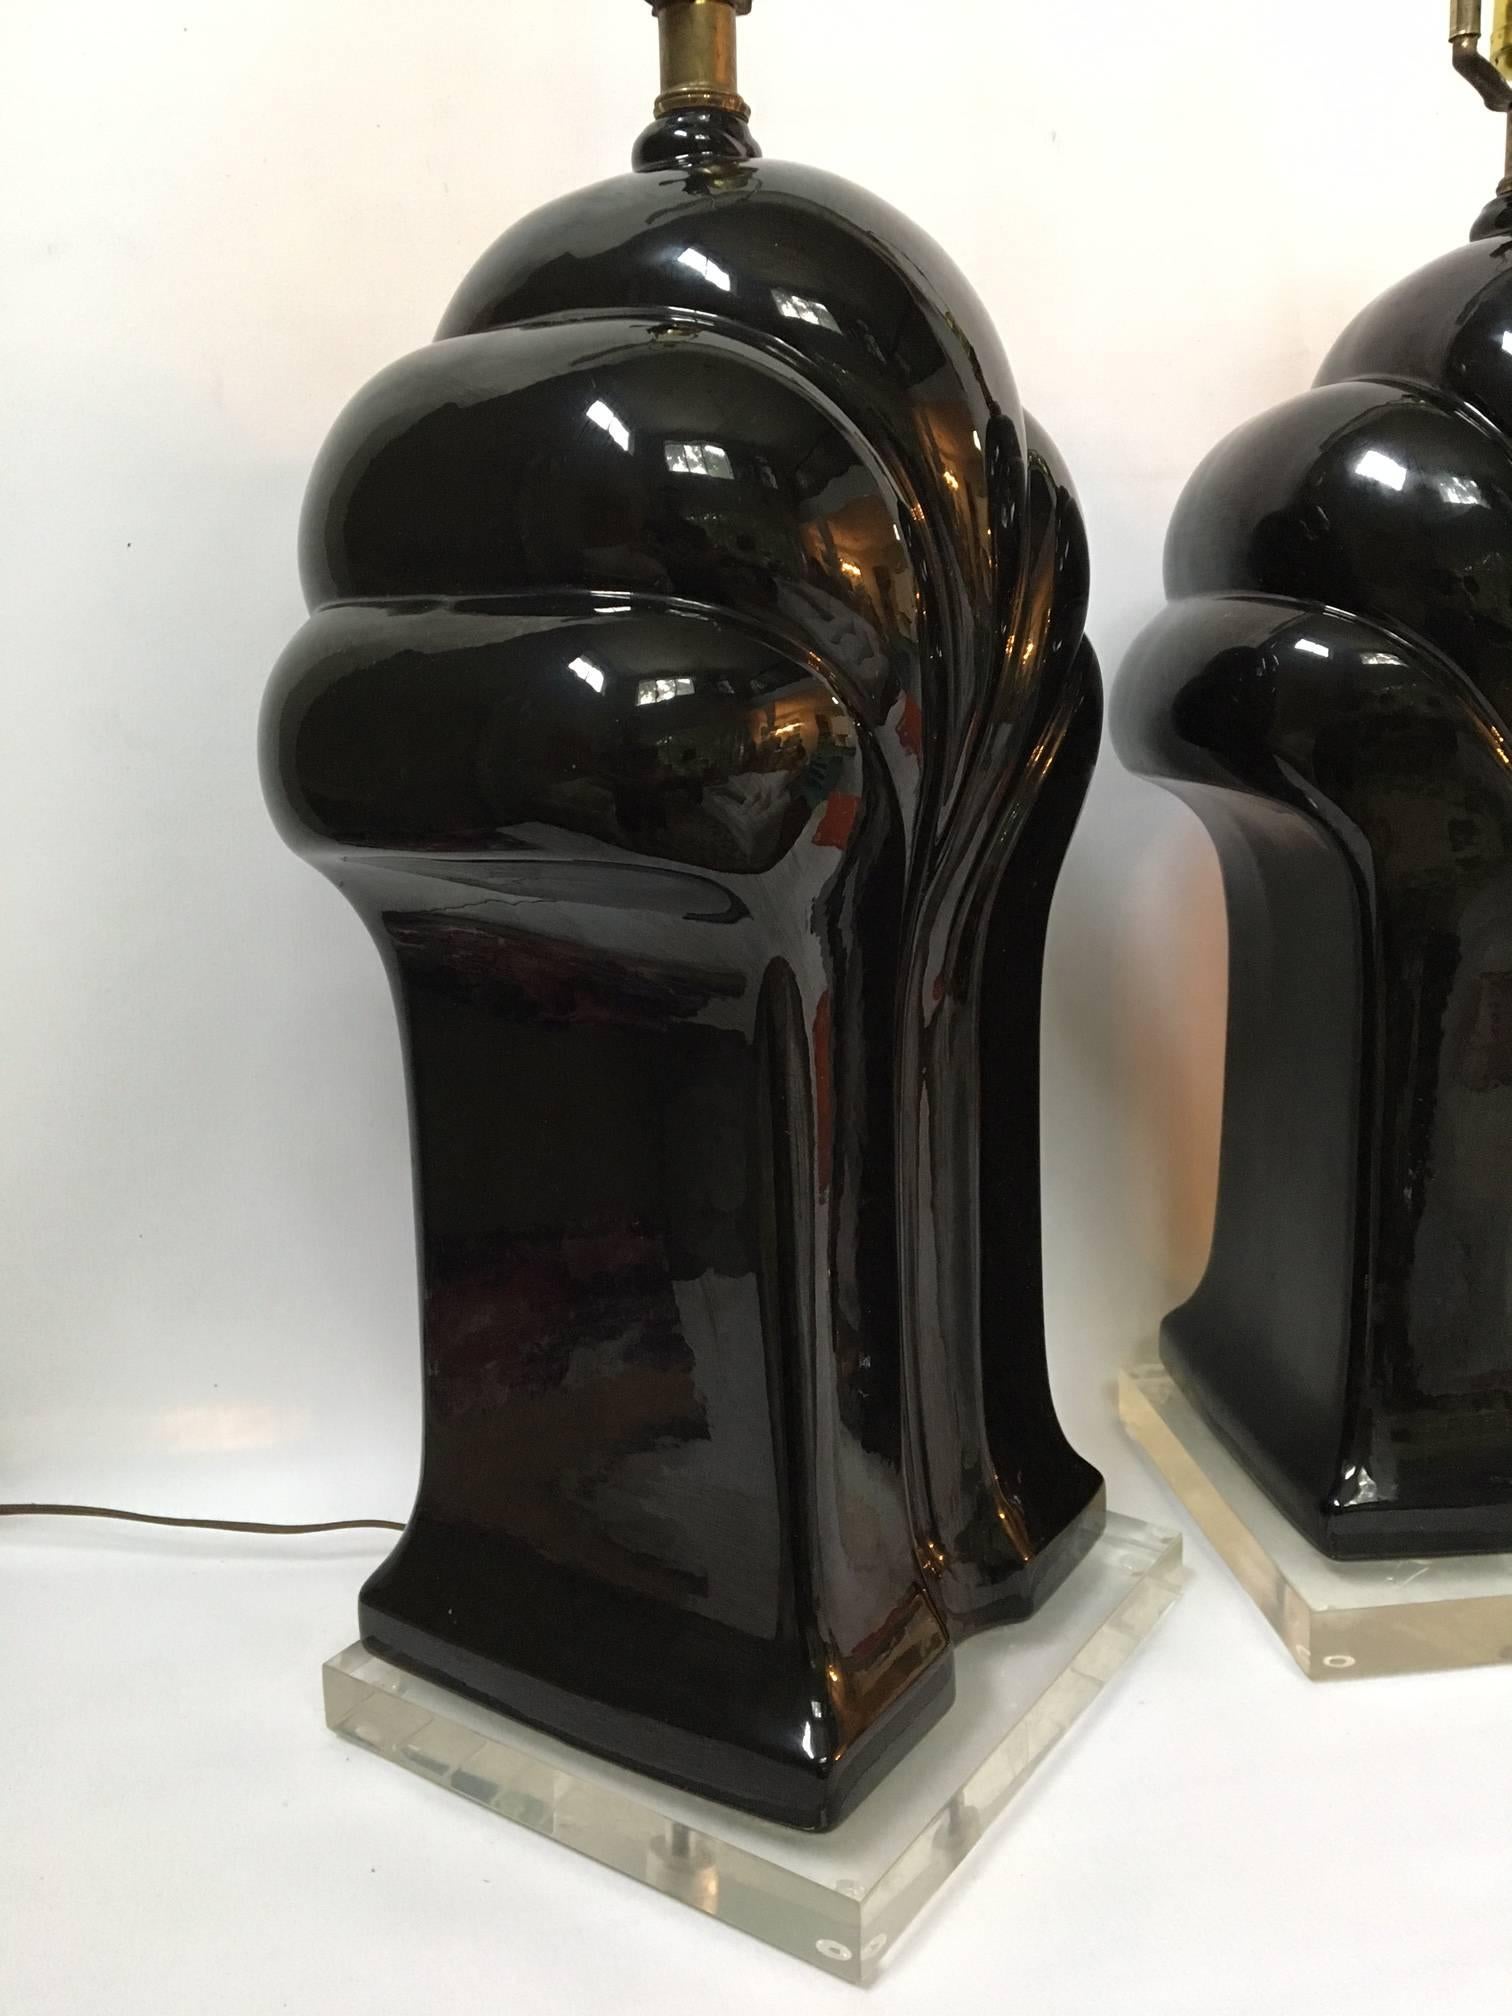 Pair of large sculptural black table lamps in an iconic art deco form. The ceramic body sits on a Lucite plinth base.
Each lamp measures 9